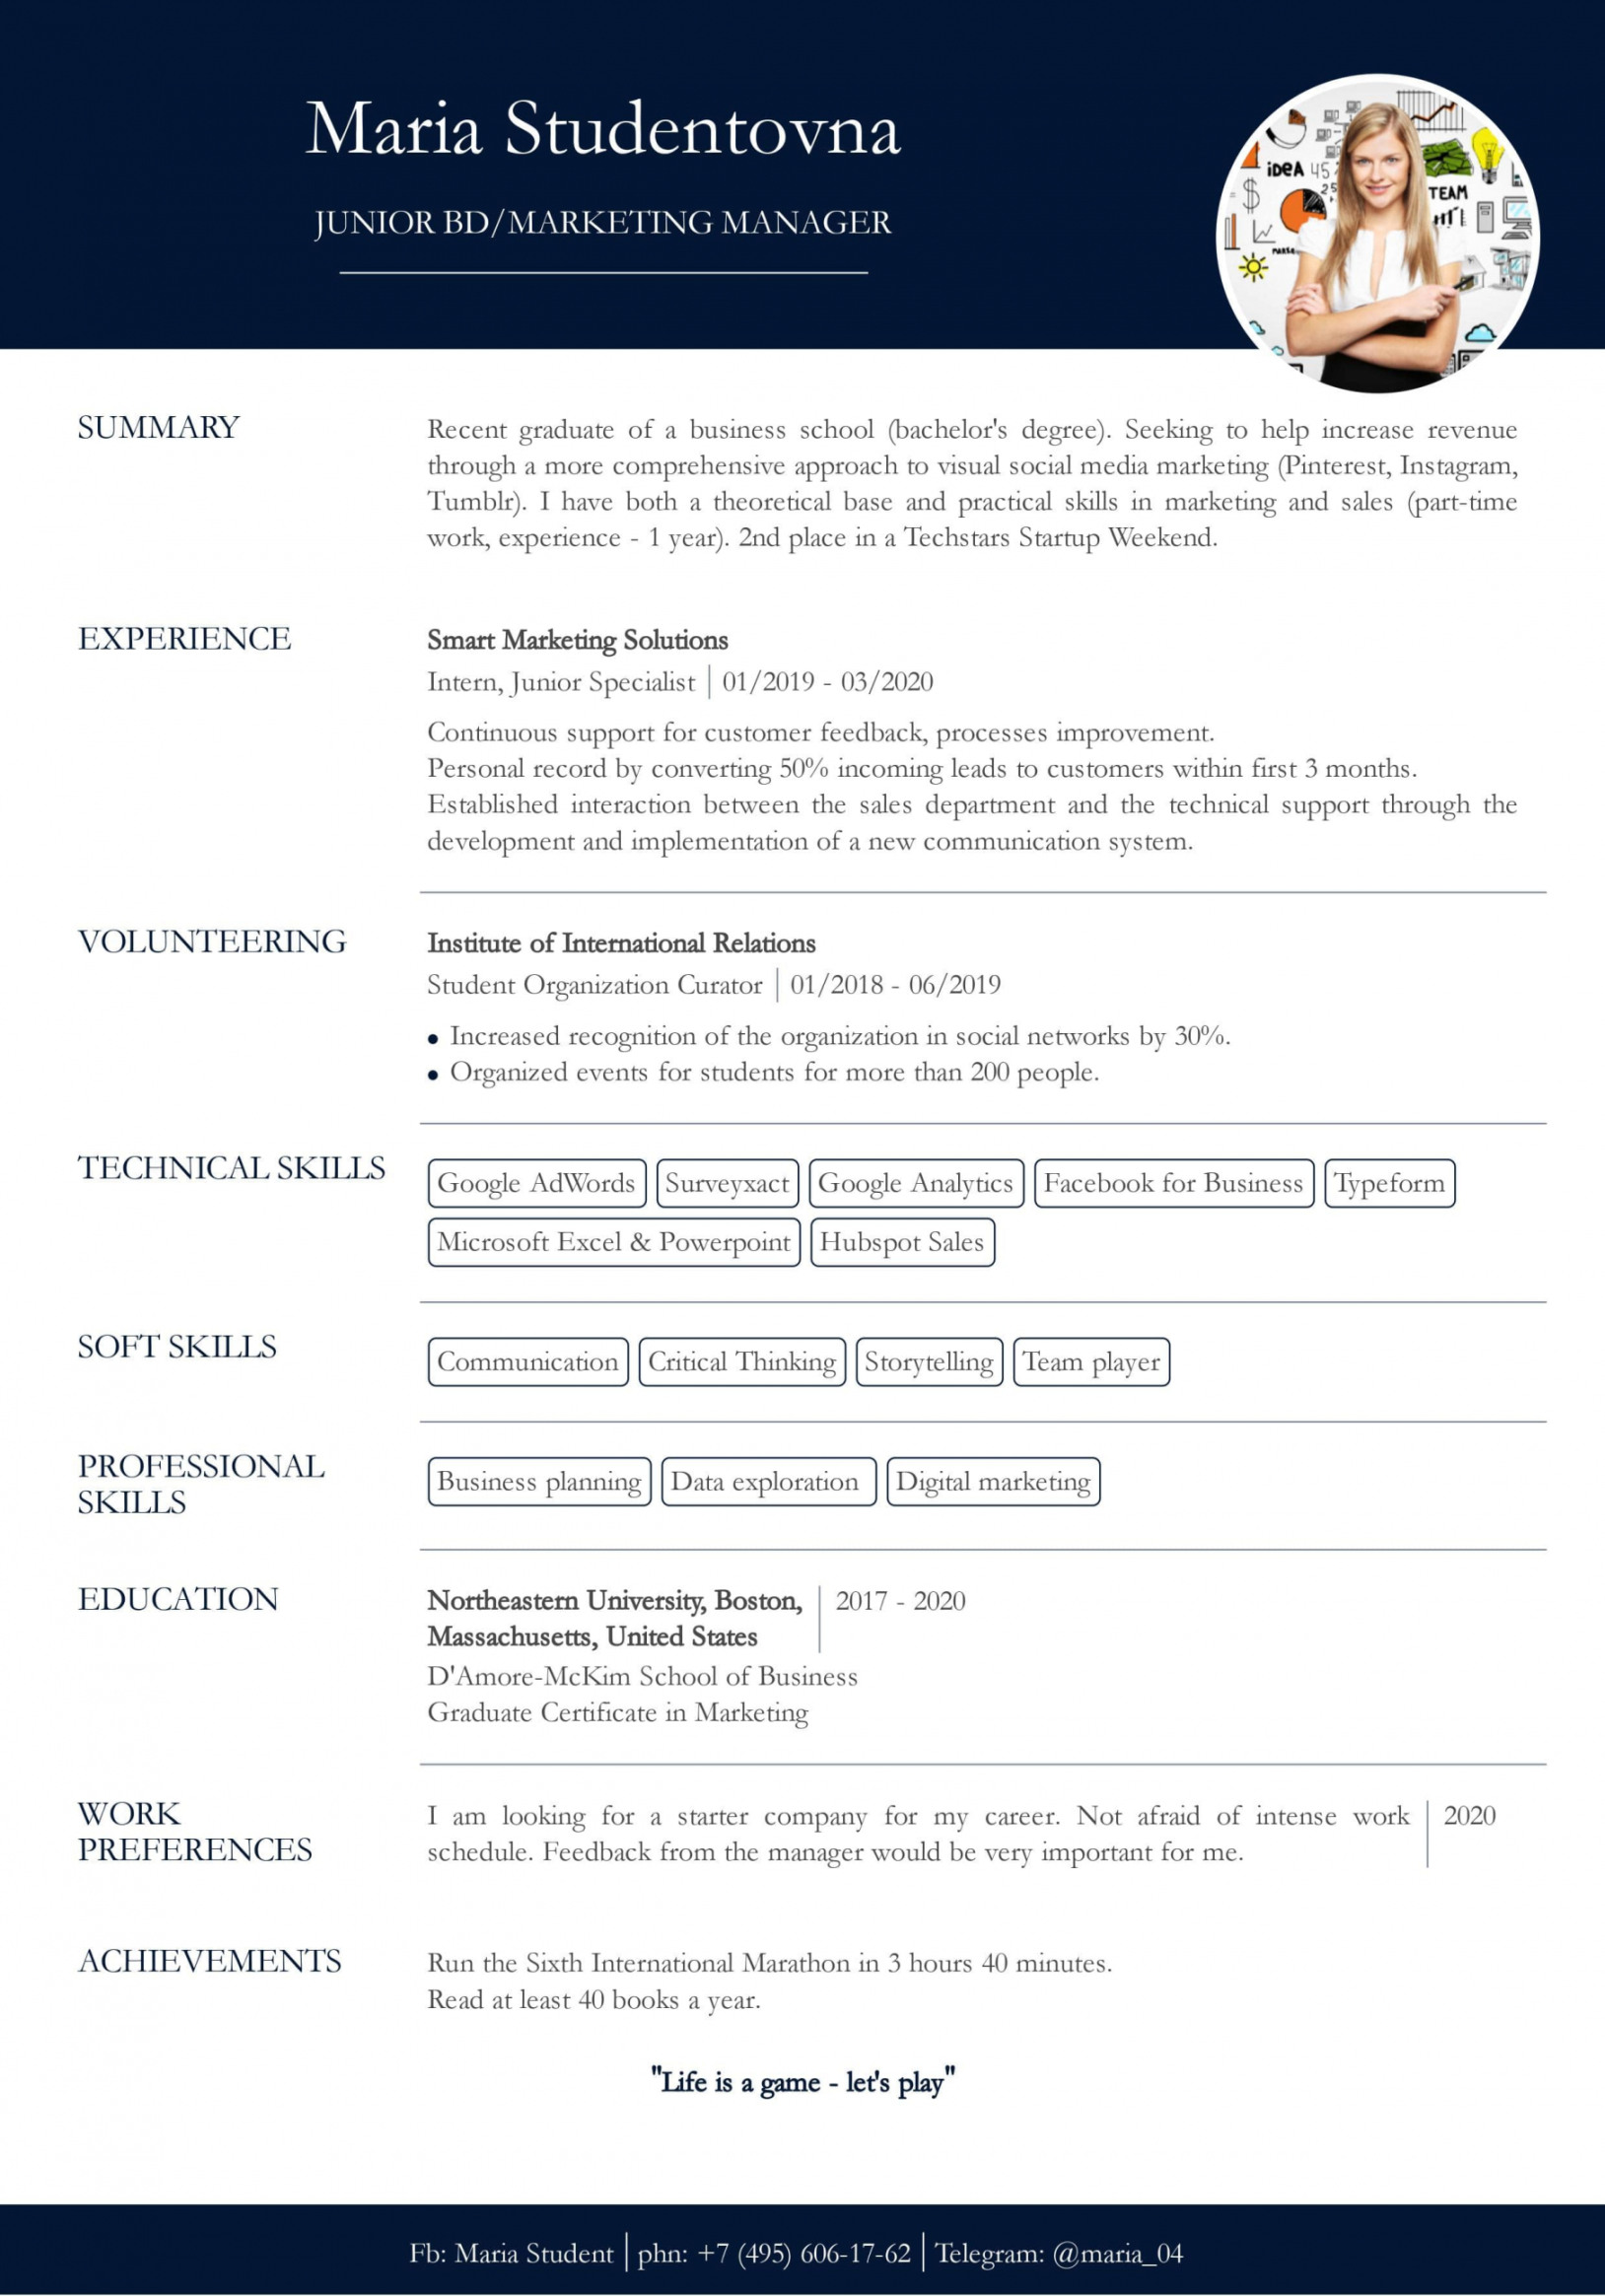 Resume With no Work Experience. Sample for Students